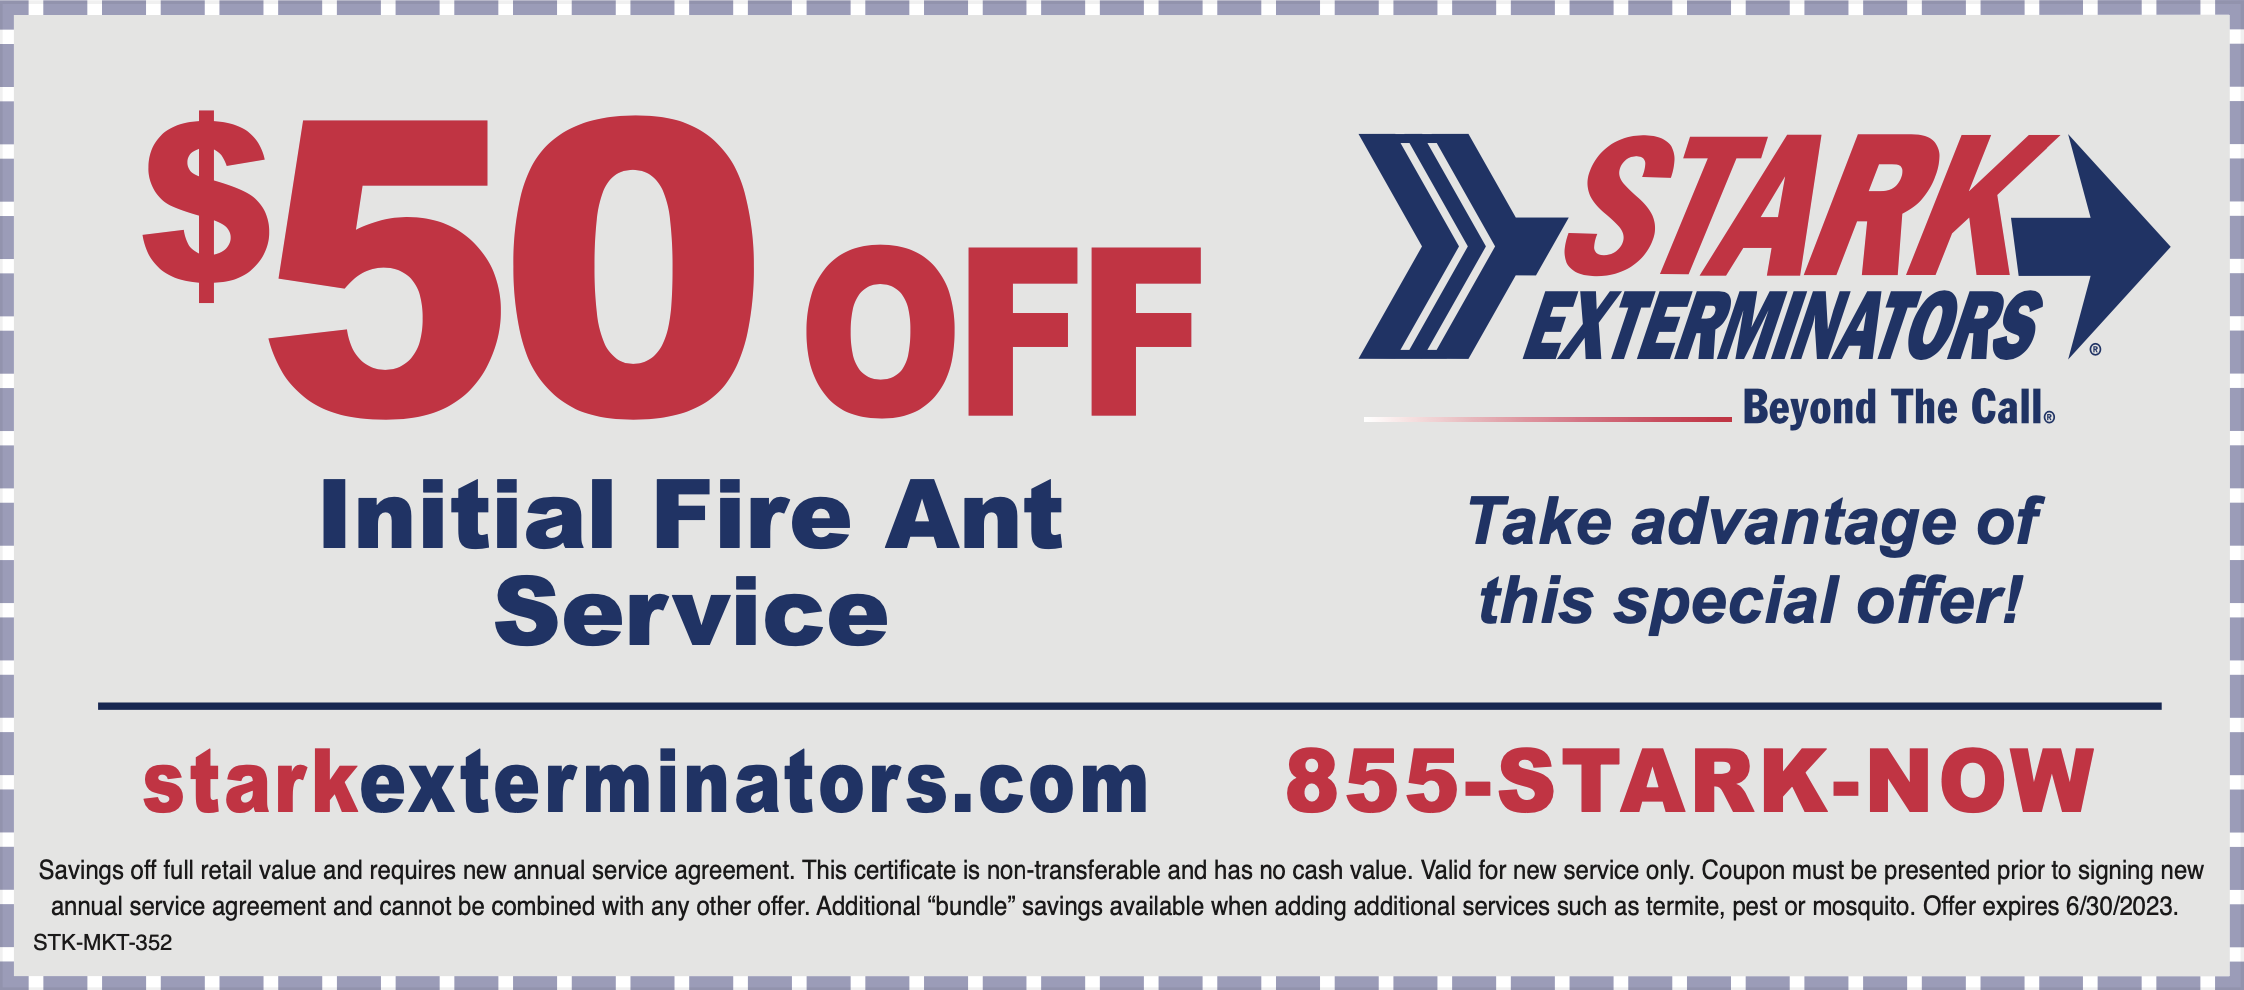 stark_fire_ant_coupon_exp_2023.png